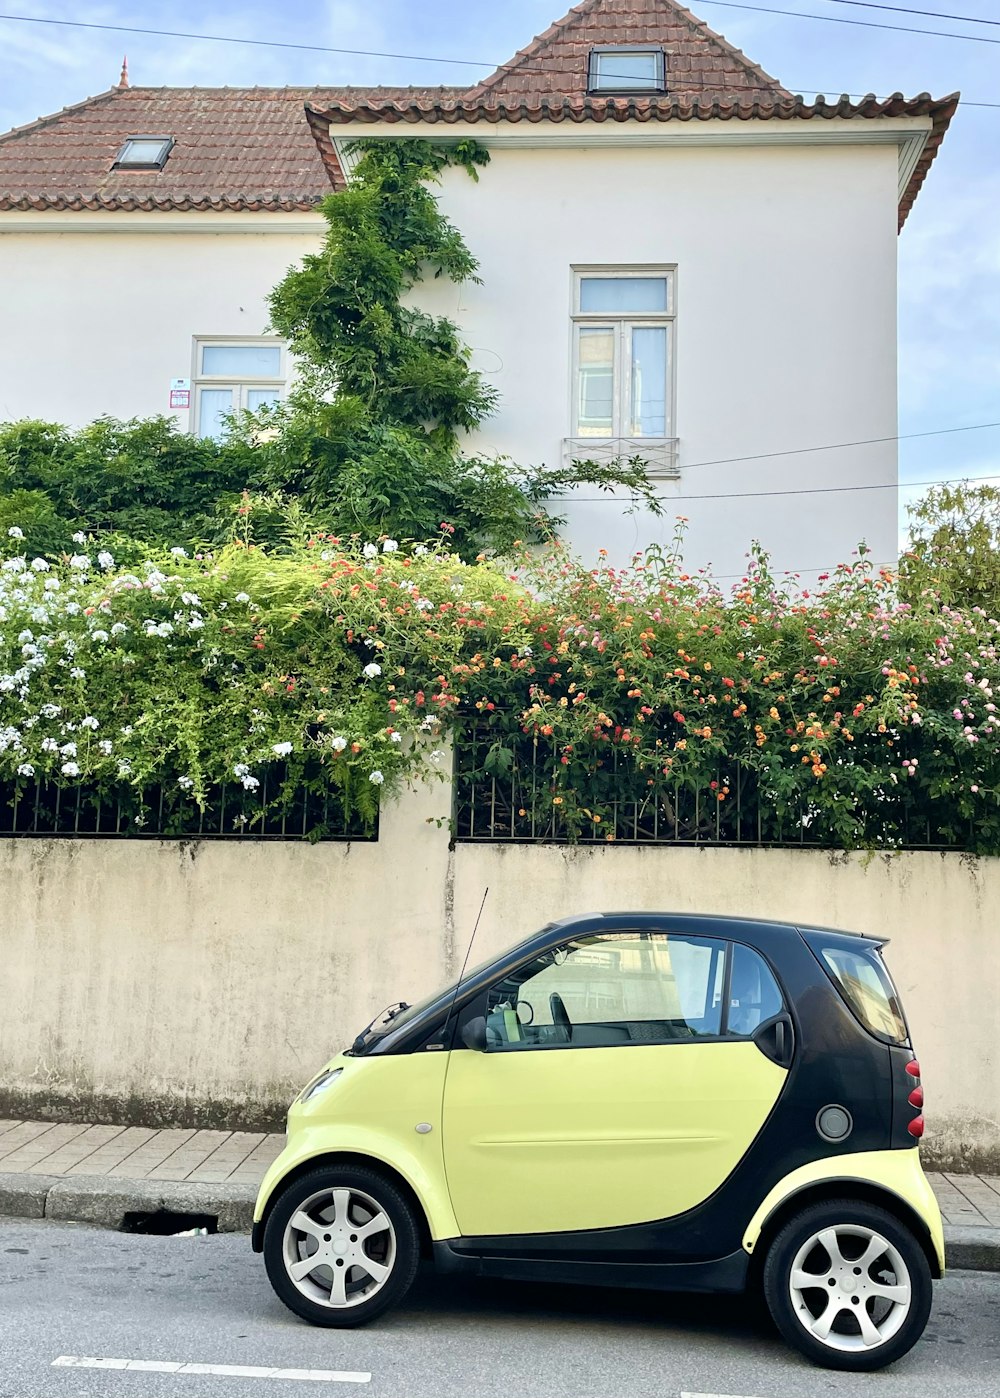 a yellow car parked in front of a house with flowers on the roof